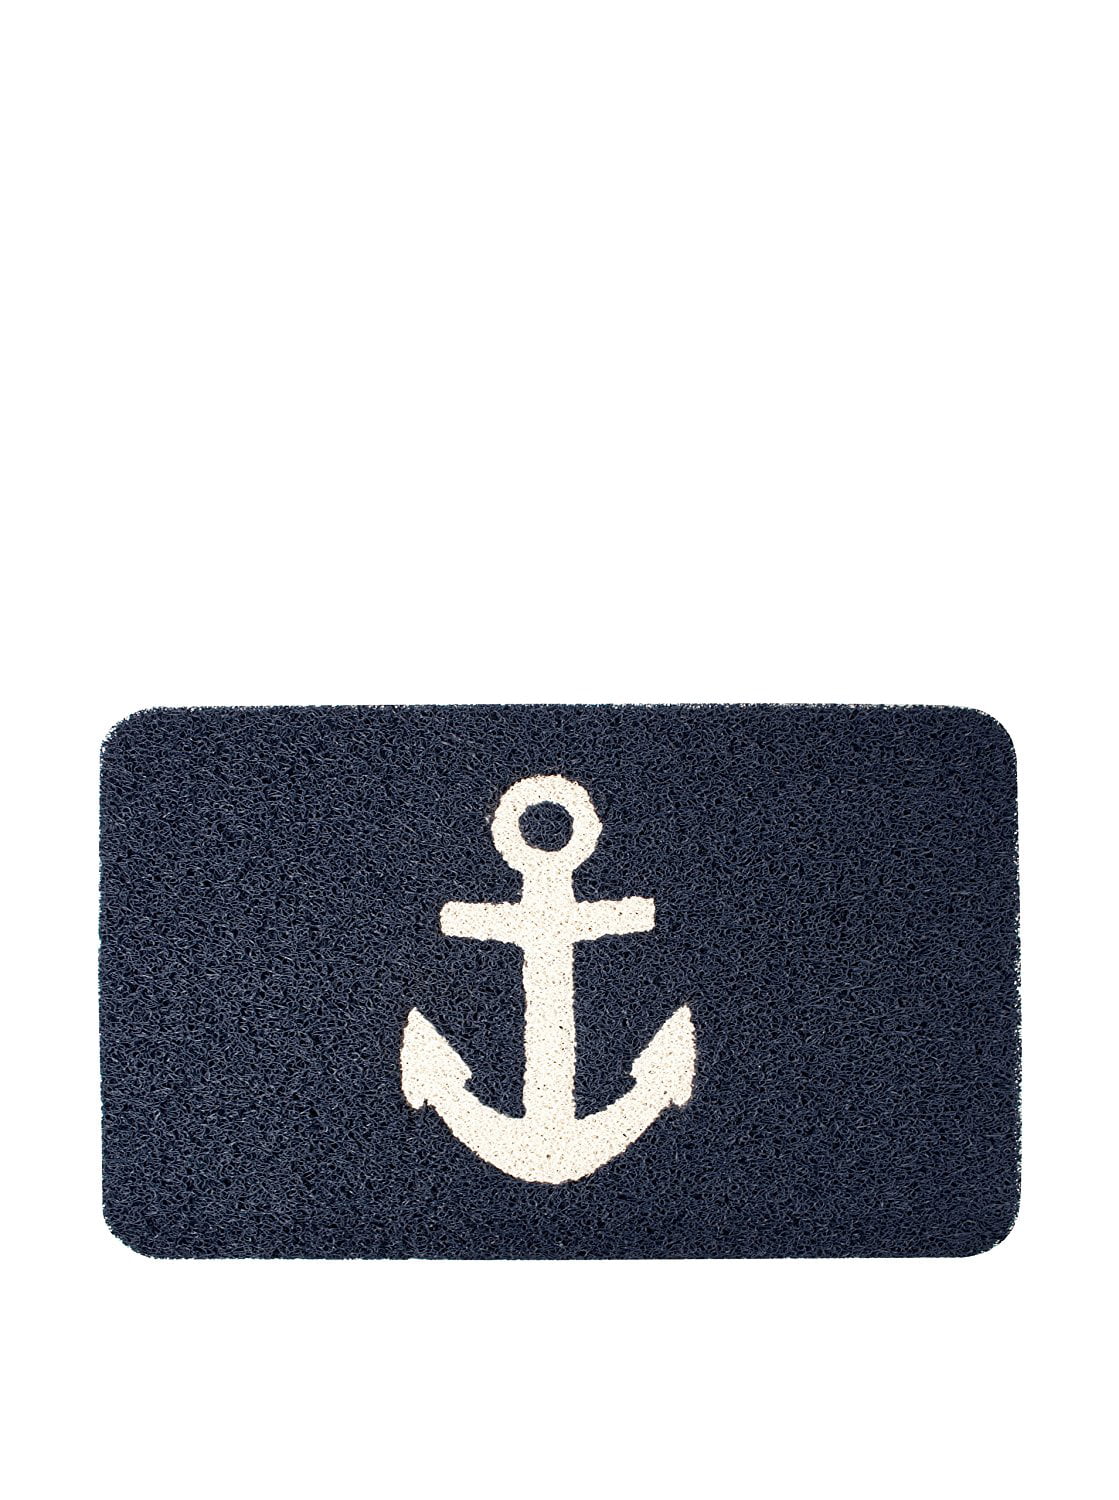 30 by 18-Inch New Kikkerland Anchor Doormat 